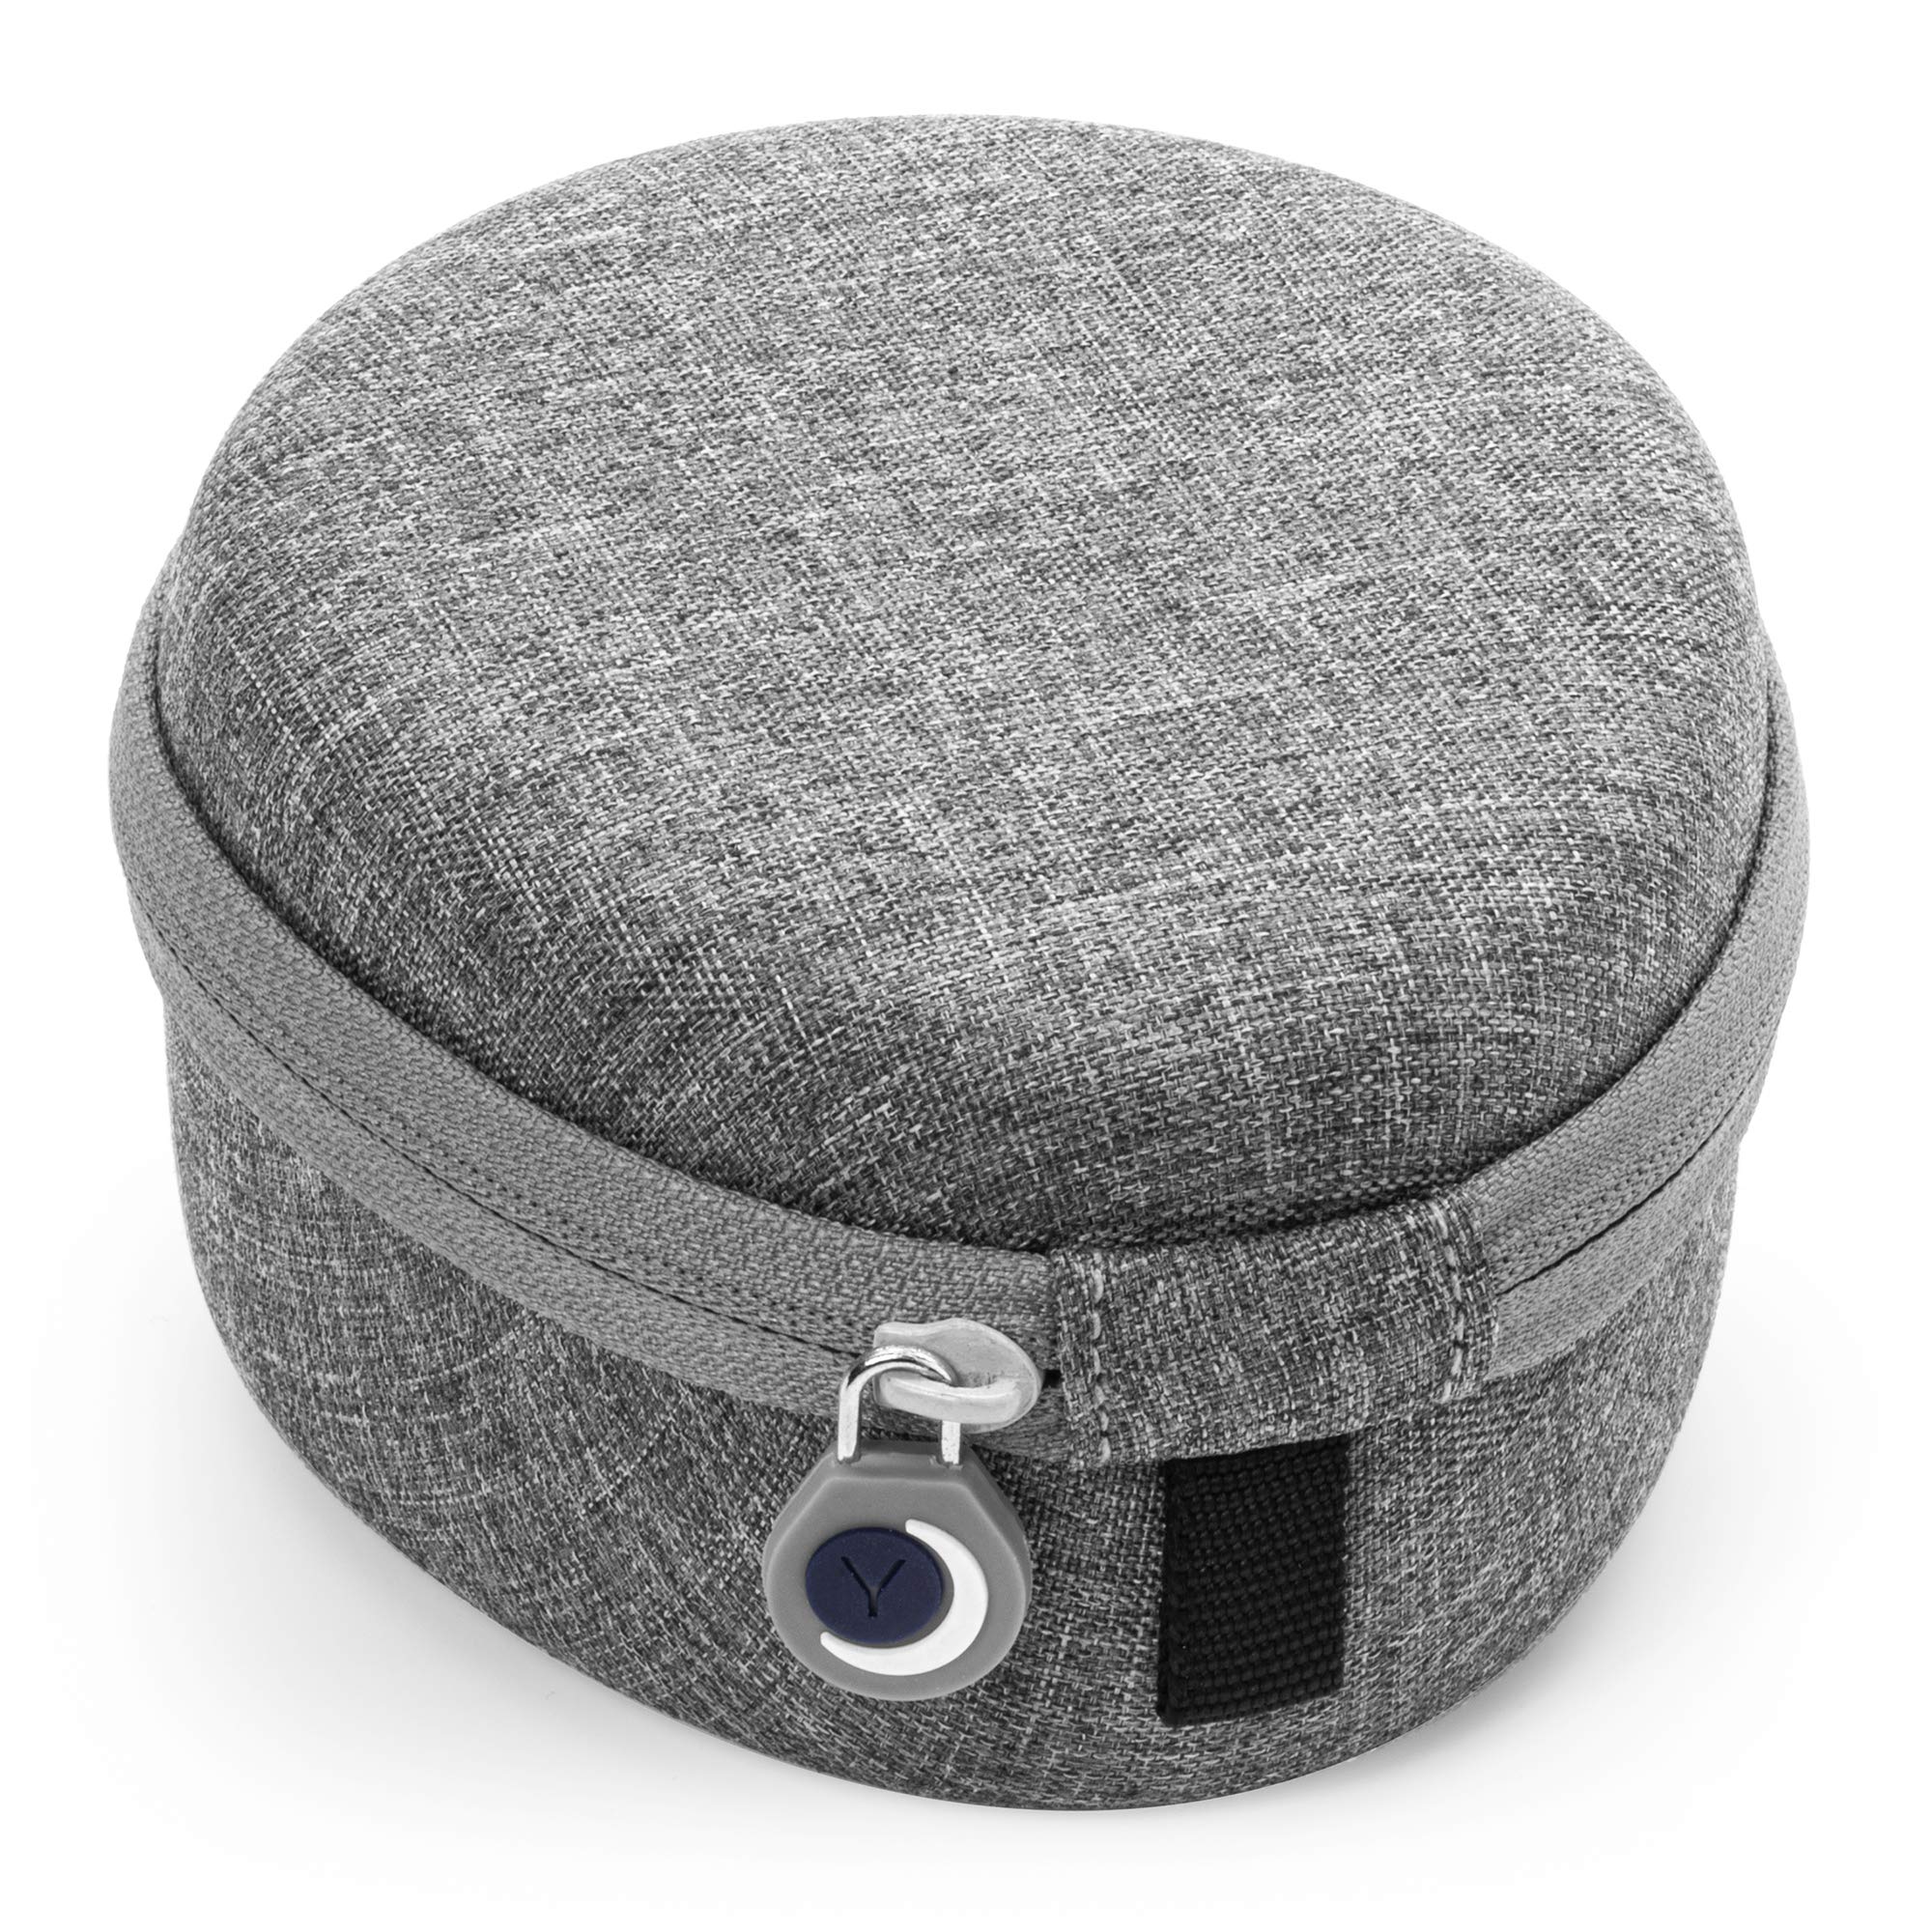 Yogasleep Crush-Resistant Travel Case for Hushh & Rohm White Noise Sound Machines, Provides Protection While Traveling, Double Stitch Zipper, Protection from Scratches & Water Splashes